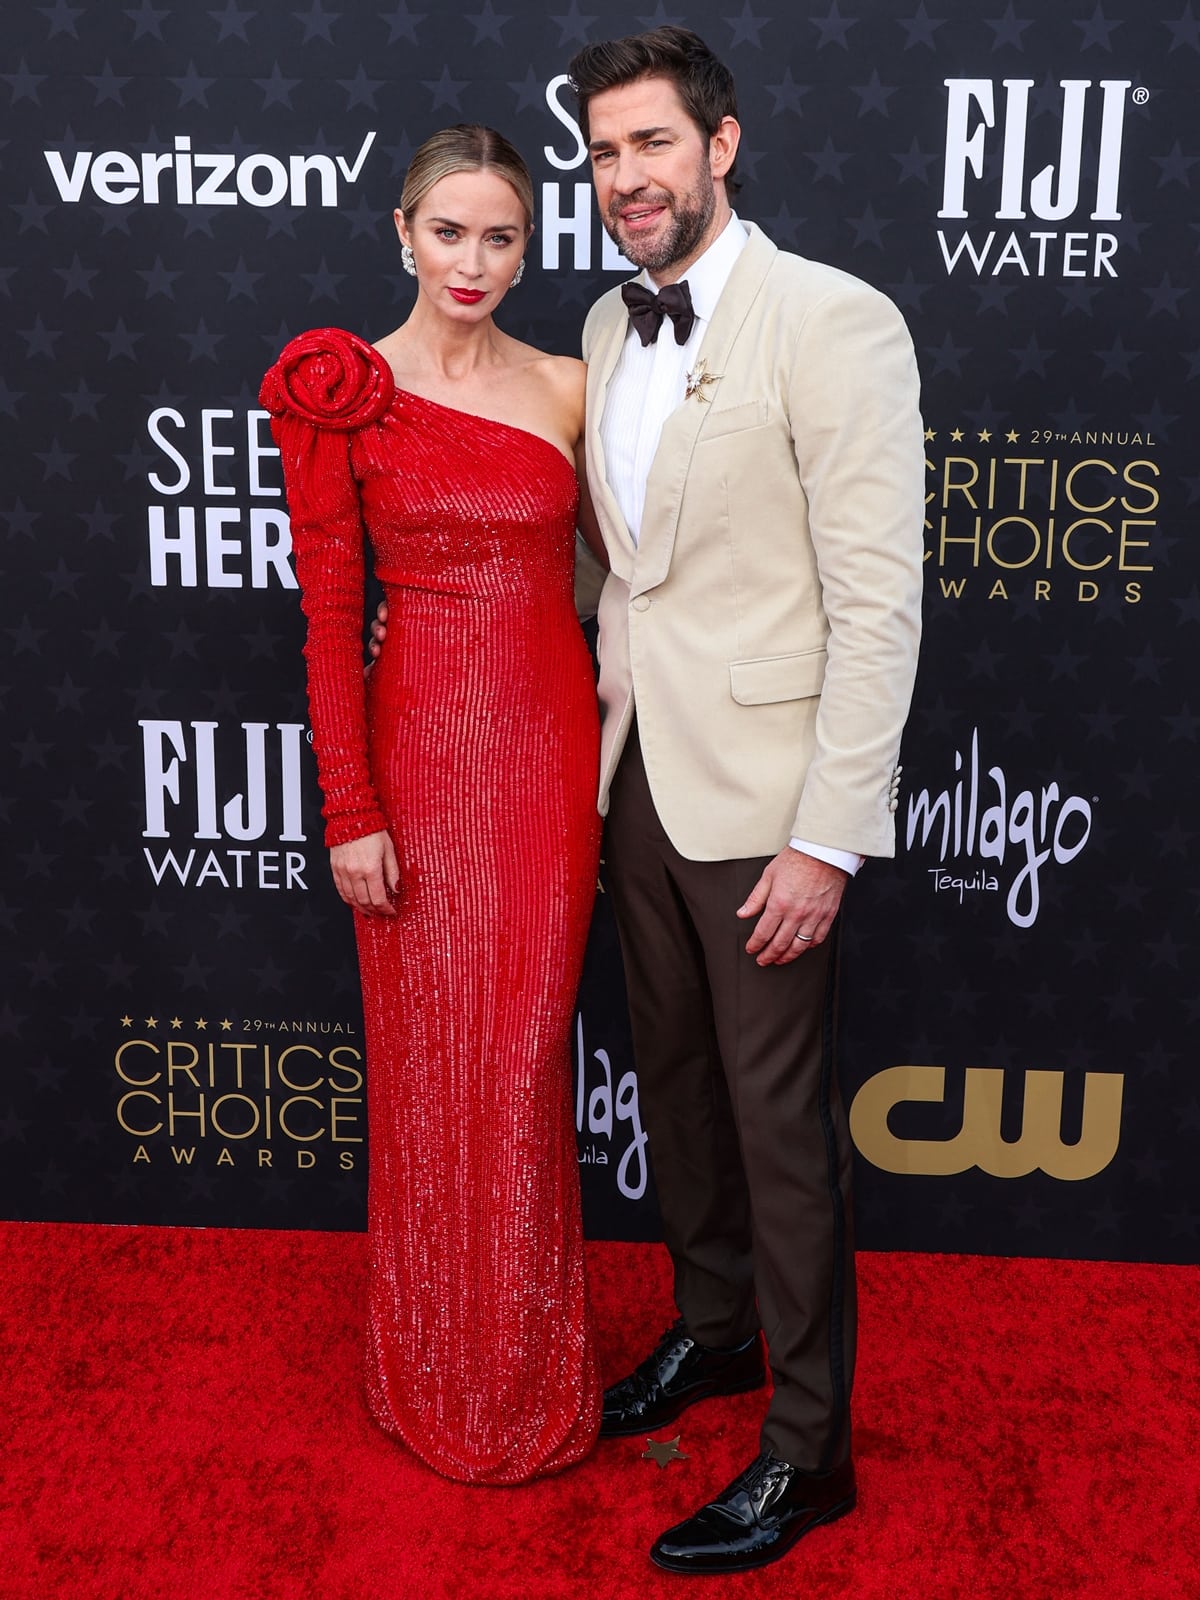 Emily Blunt and John Krasinski radiate Hollywood glamour at the 29th Annual Critics Choice Awards in Santa Monica, with Emily in a stunning Armani Privé gown and John in a sleek off-white suit jacket